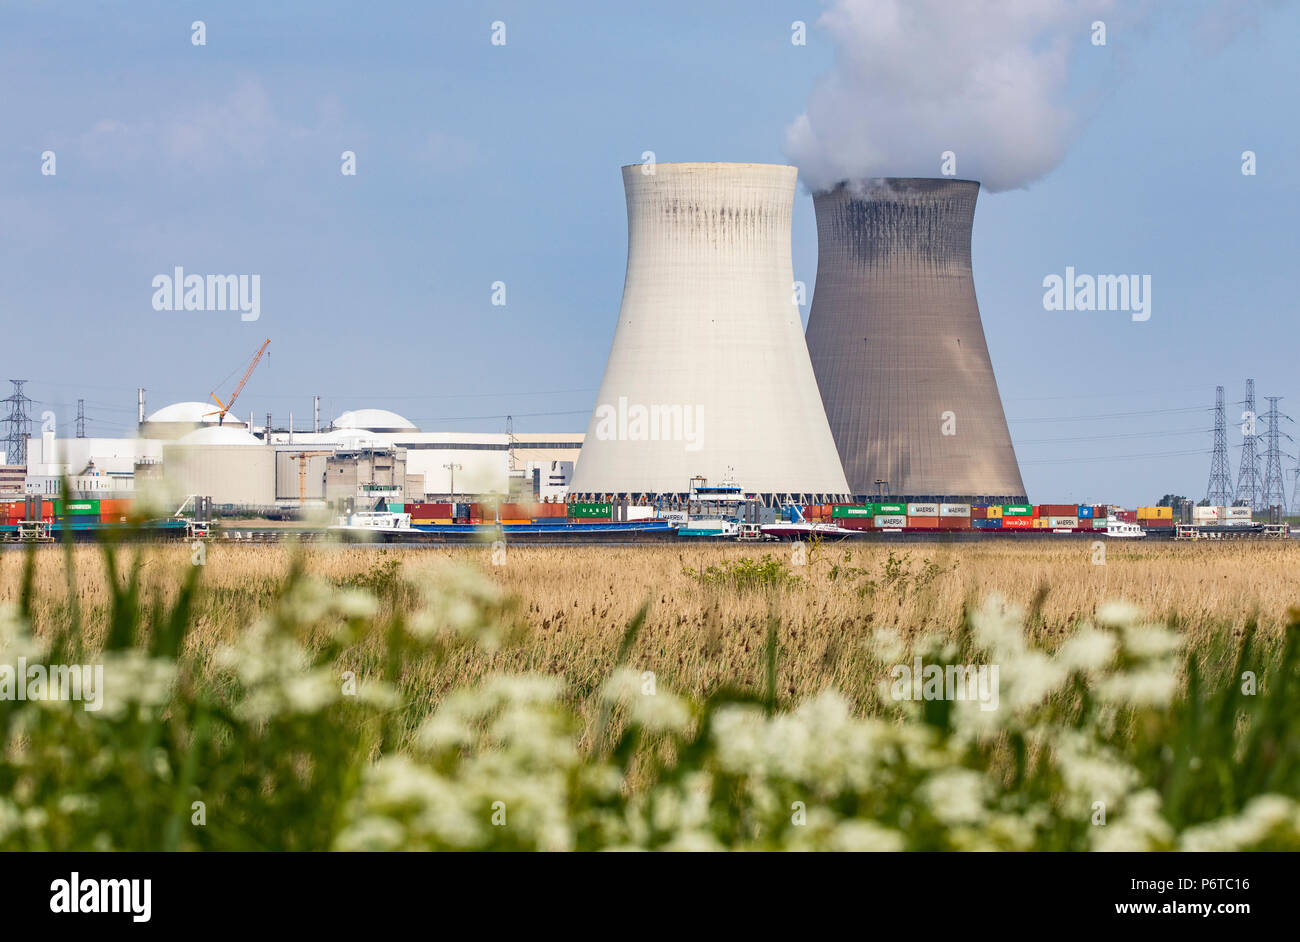 The Belgian nuclear power plant Doel, near Antwerp, on the Scheldt, nuclear power plant with 4 power plant units, with pressurized water reactors, ope Stock Photo